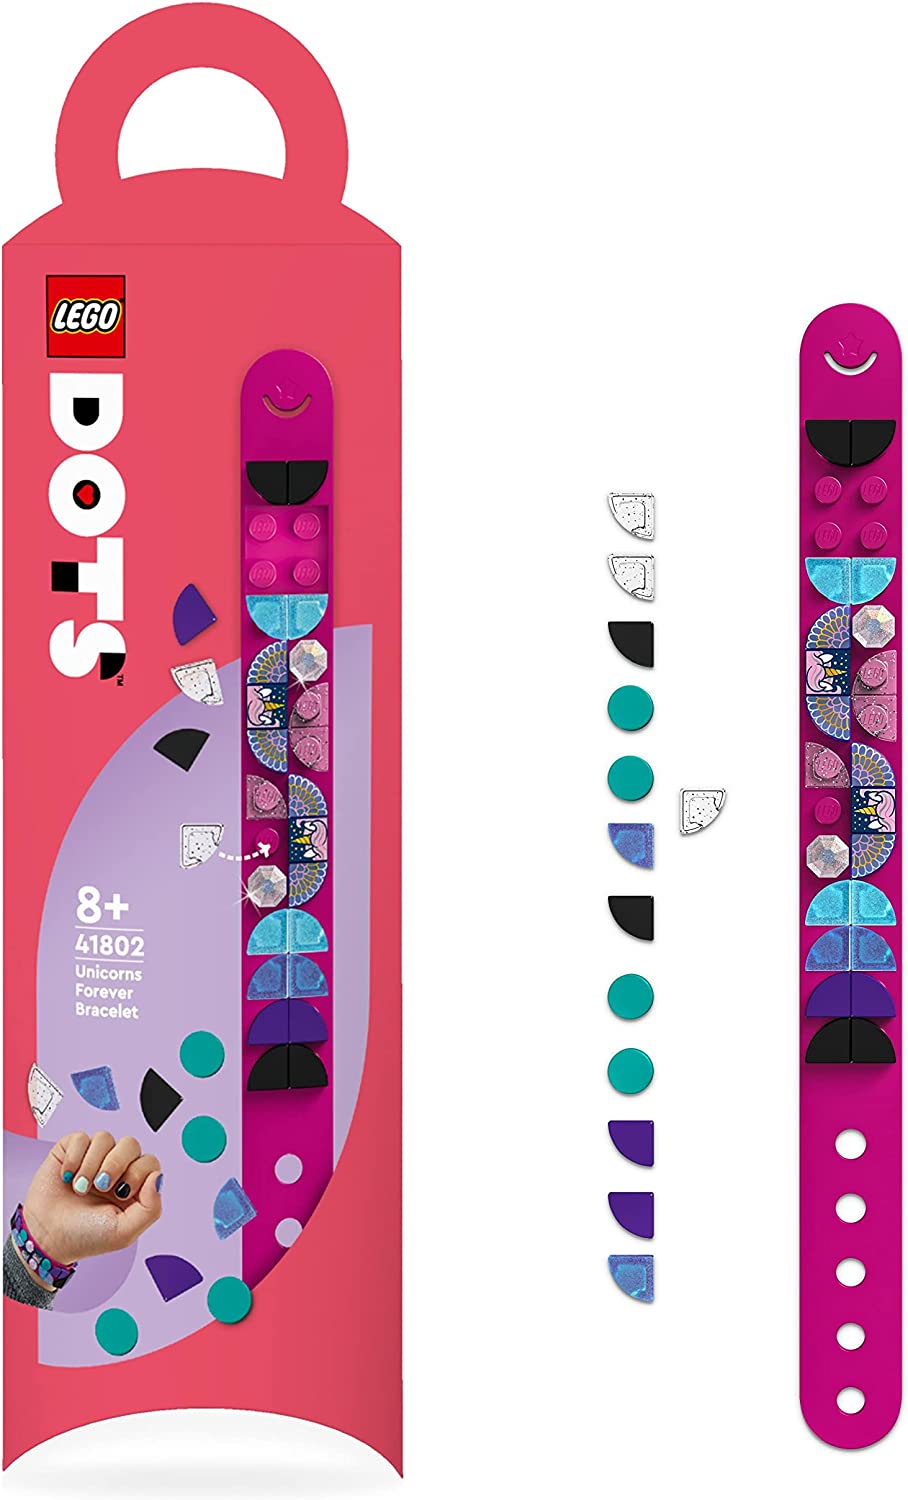 LEGO 41802 DOTS Unicorn Bracelet, Creative Toy DIY Jewellery Craft Set with Glitter Stones for Children, Small Gift for Girls from 6 Years